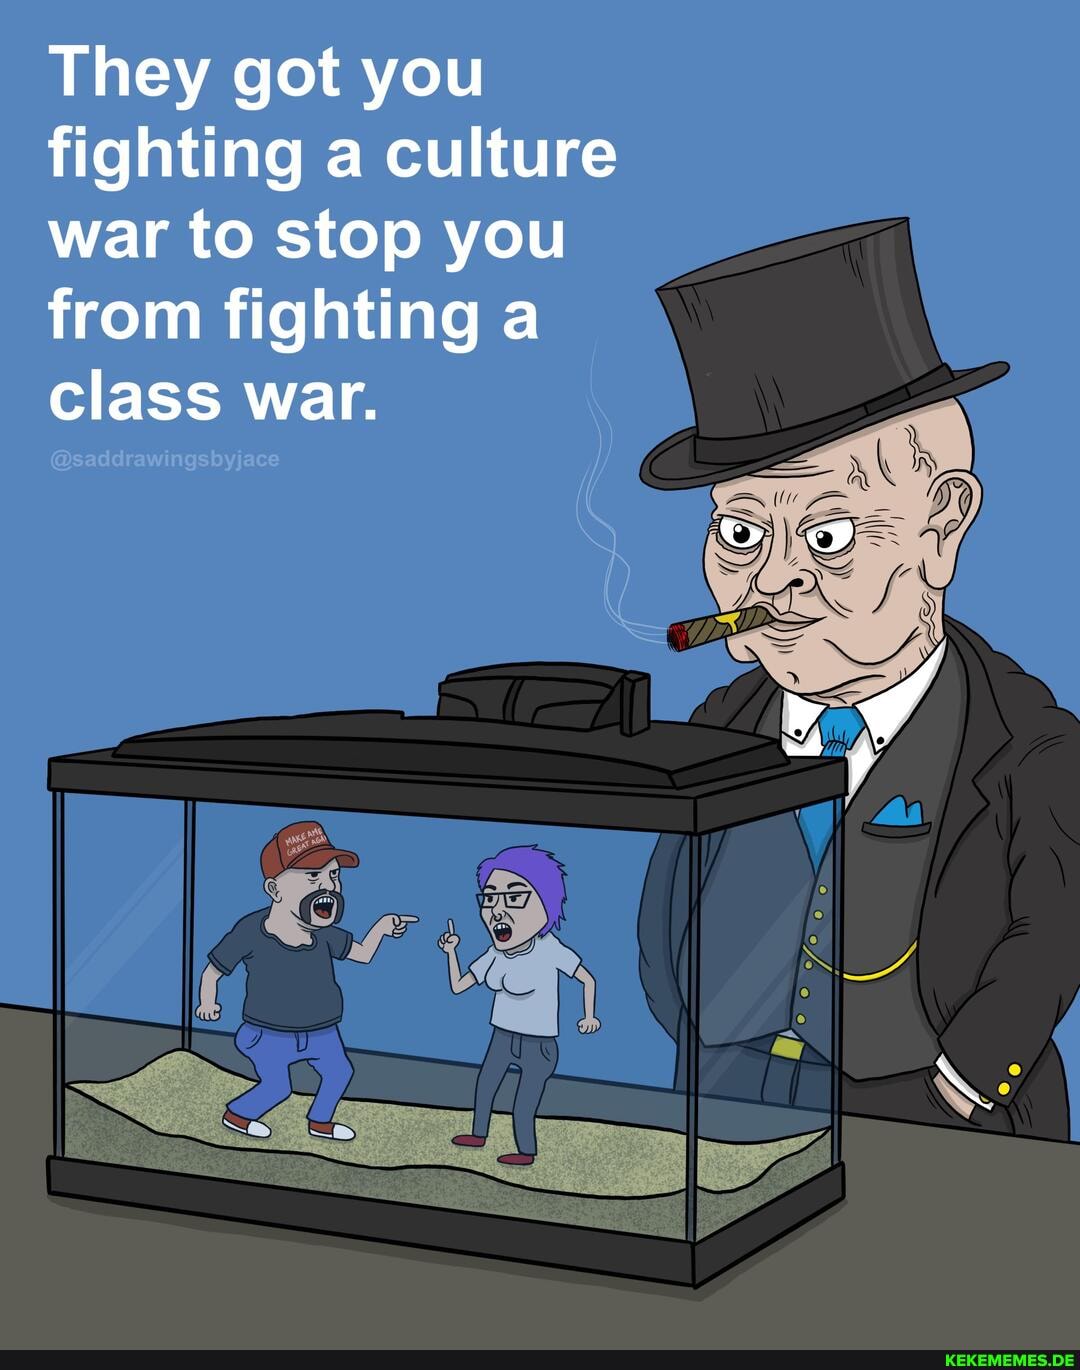 They got you fighting a culture war to stop you from fighting a class war.